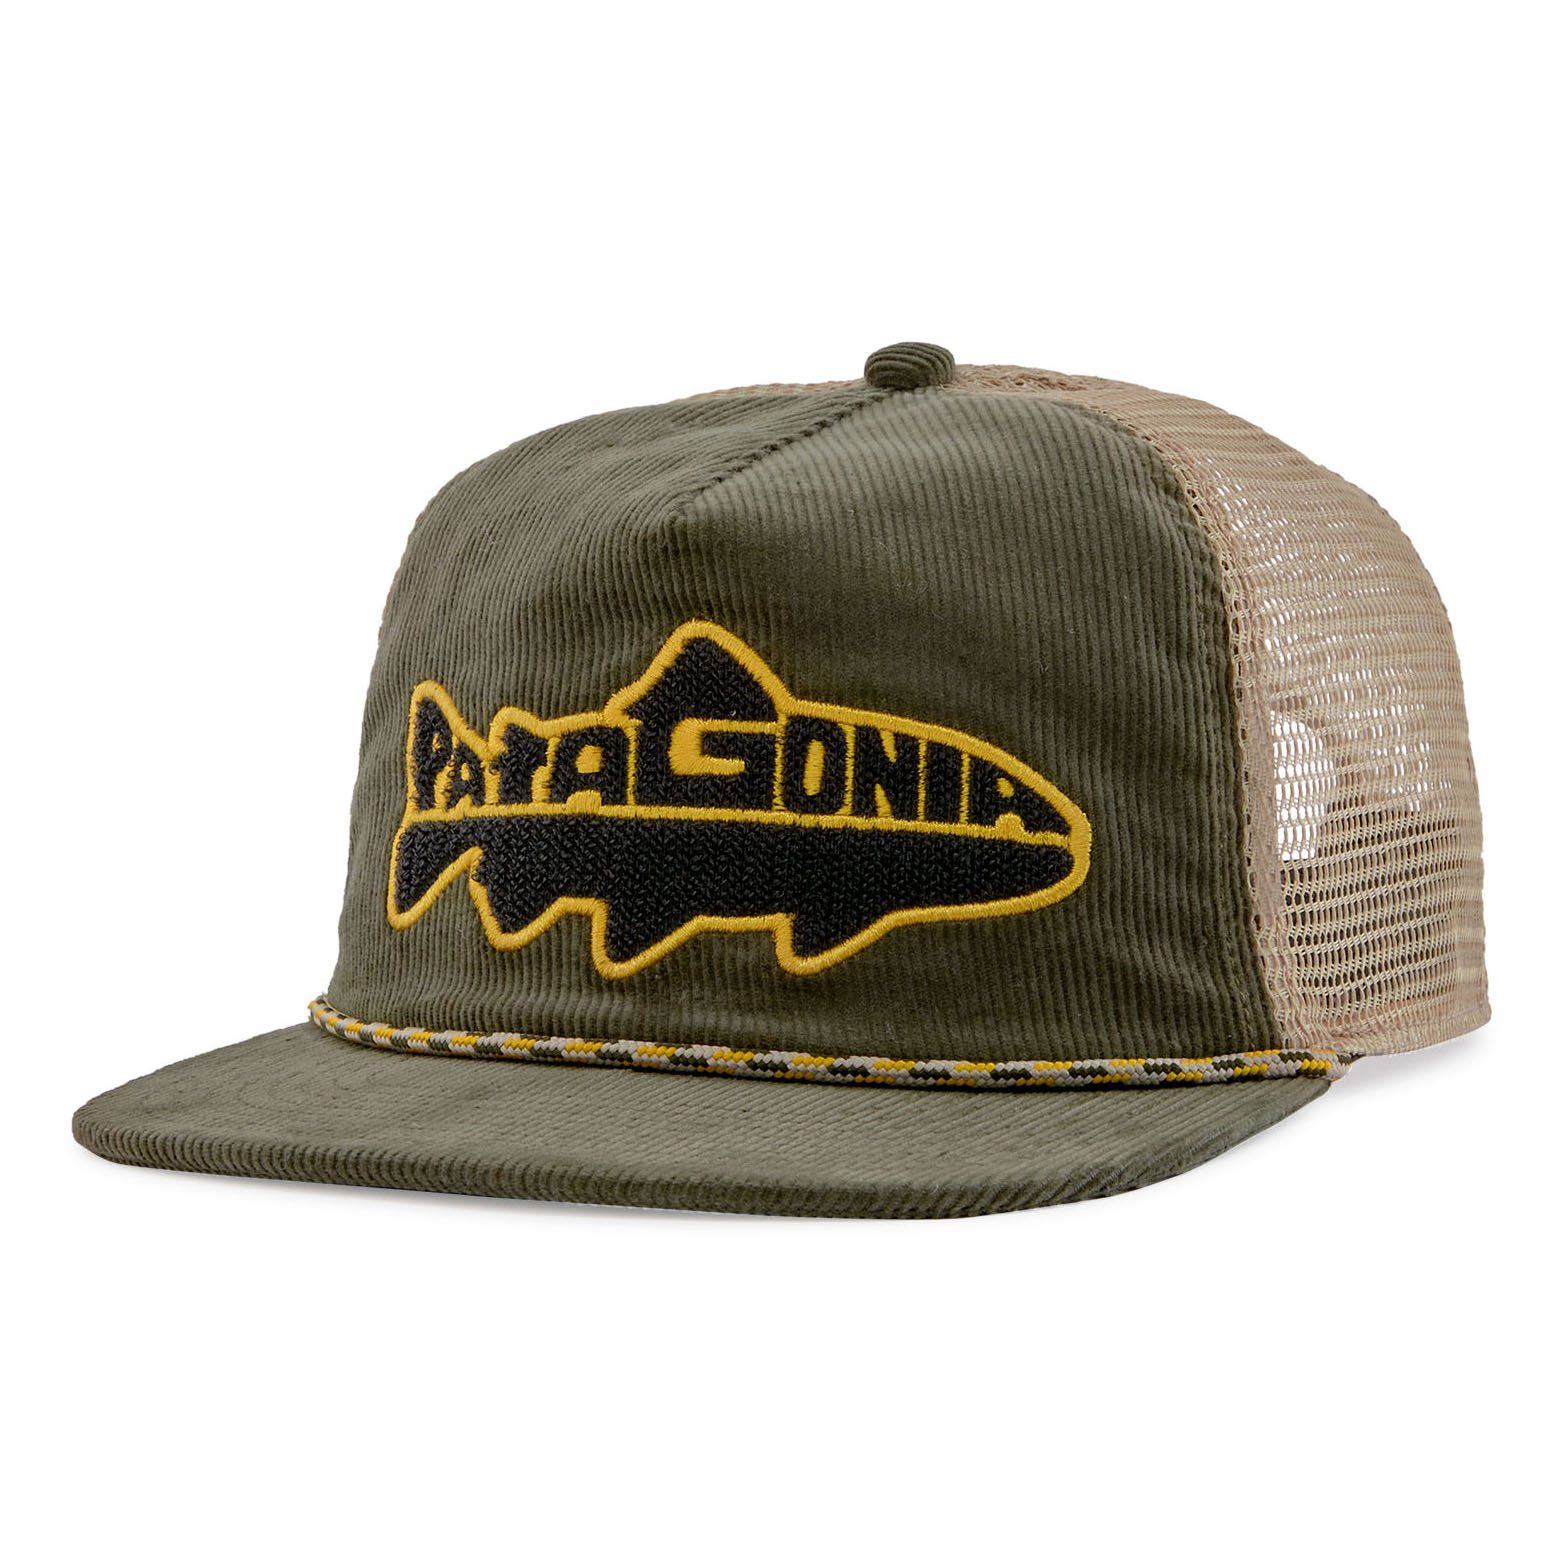 Patagonia Fly Catcher Hat - Industrial Green | Baseball & Trucker